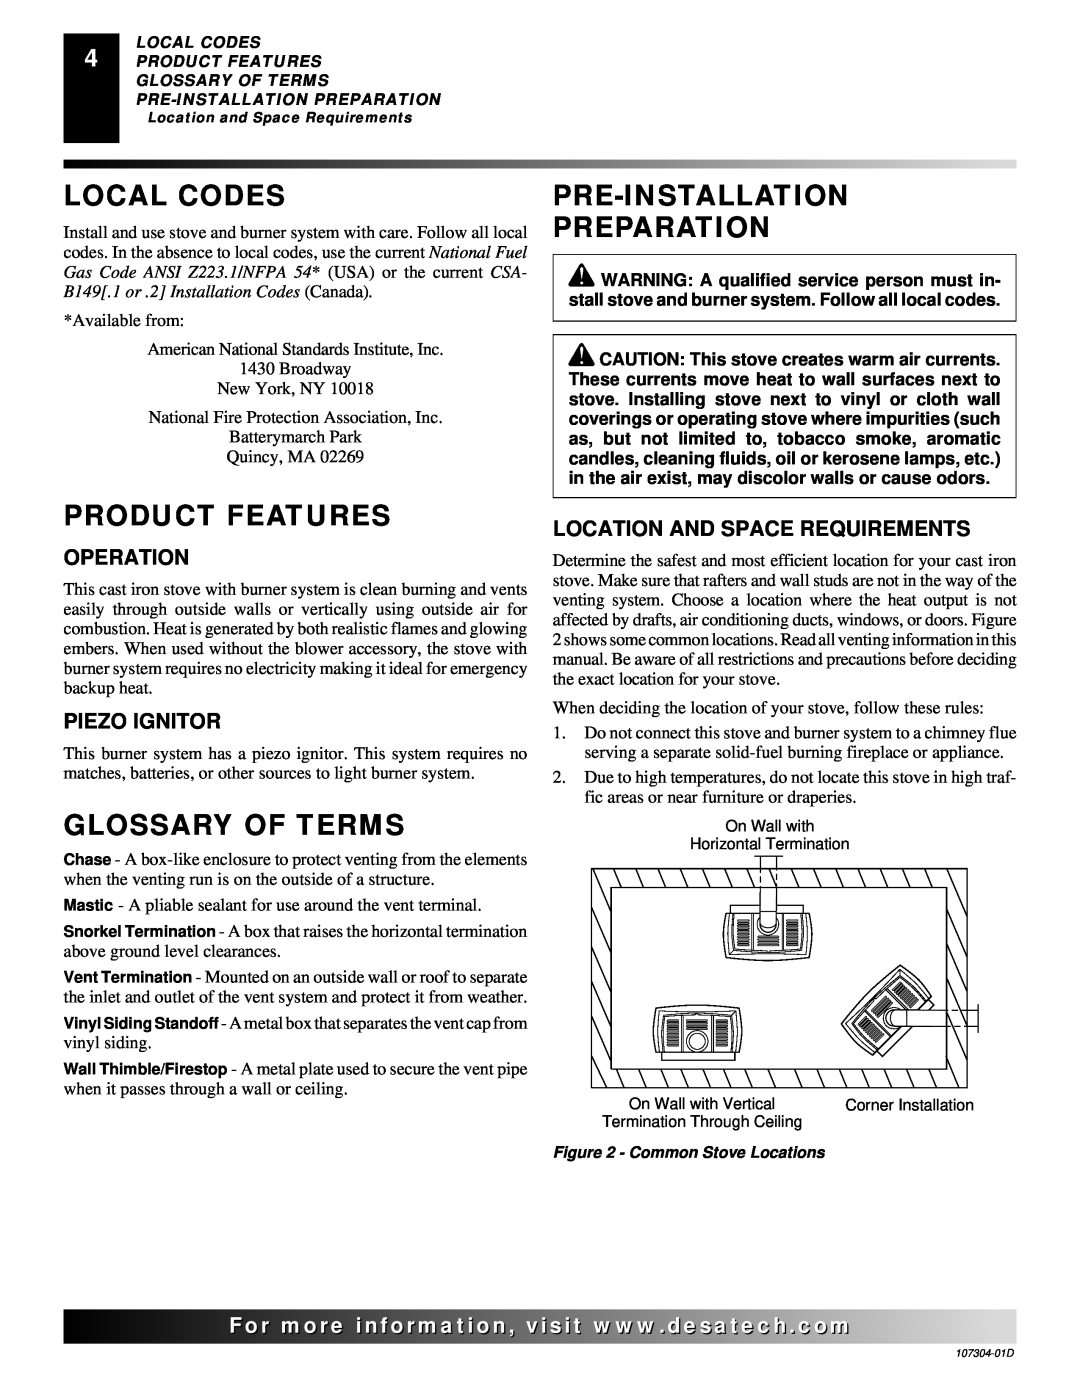 Desa SDVBPC Local Codes, Pre-Installation Preparation, Product Features, Glossary Of Terms, Operation, Piezo Ignitor 